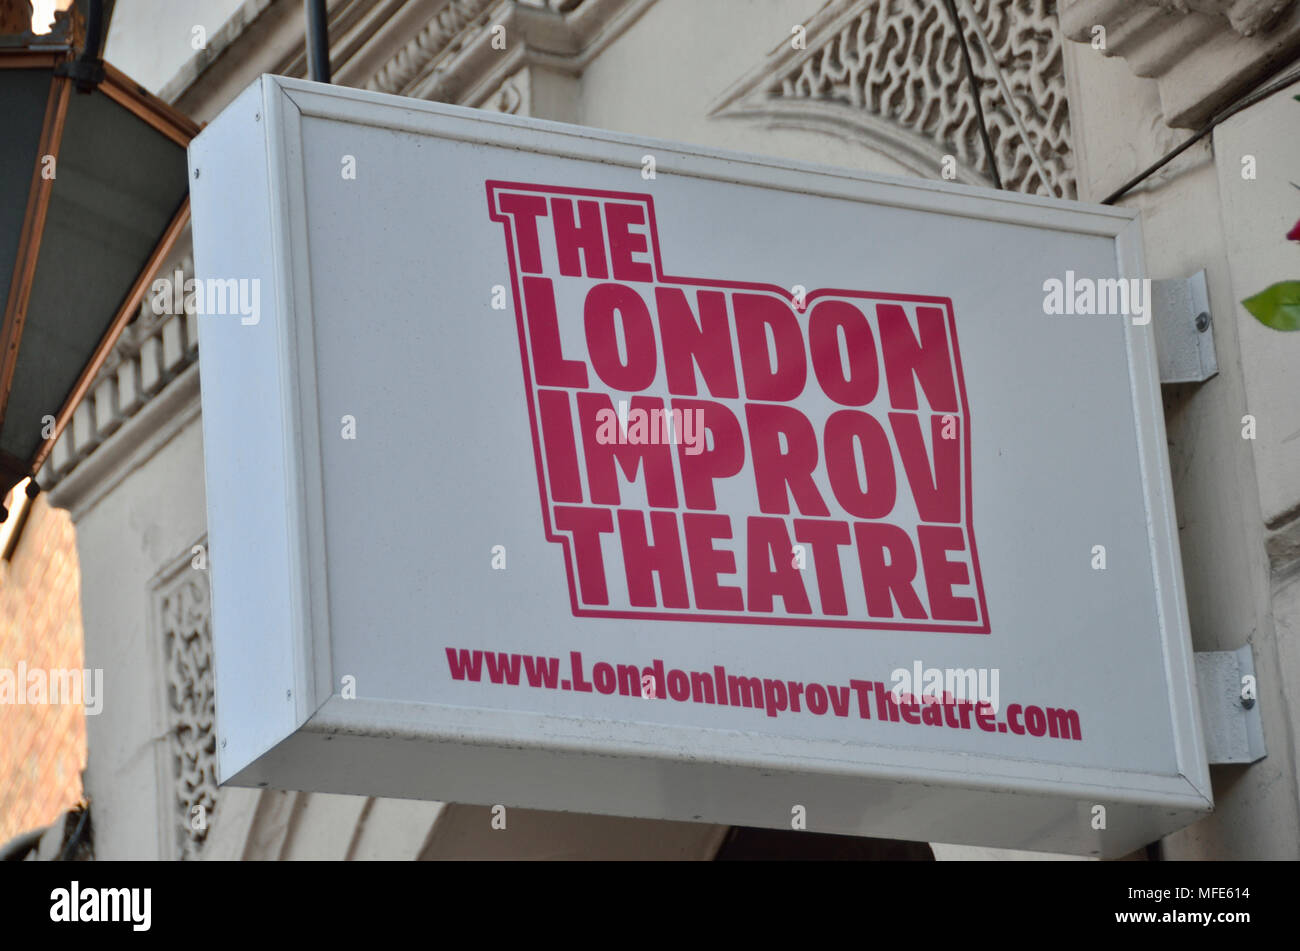 The London Improv Theatre on Finchley Road NW3, London, UK. Stock Photo